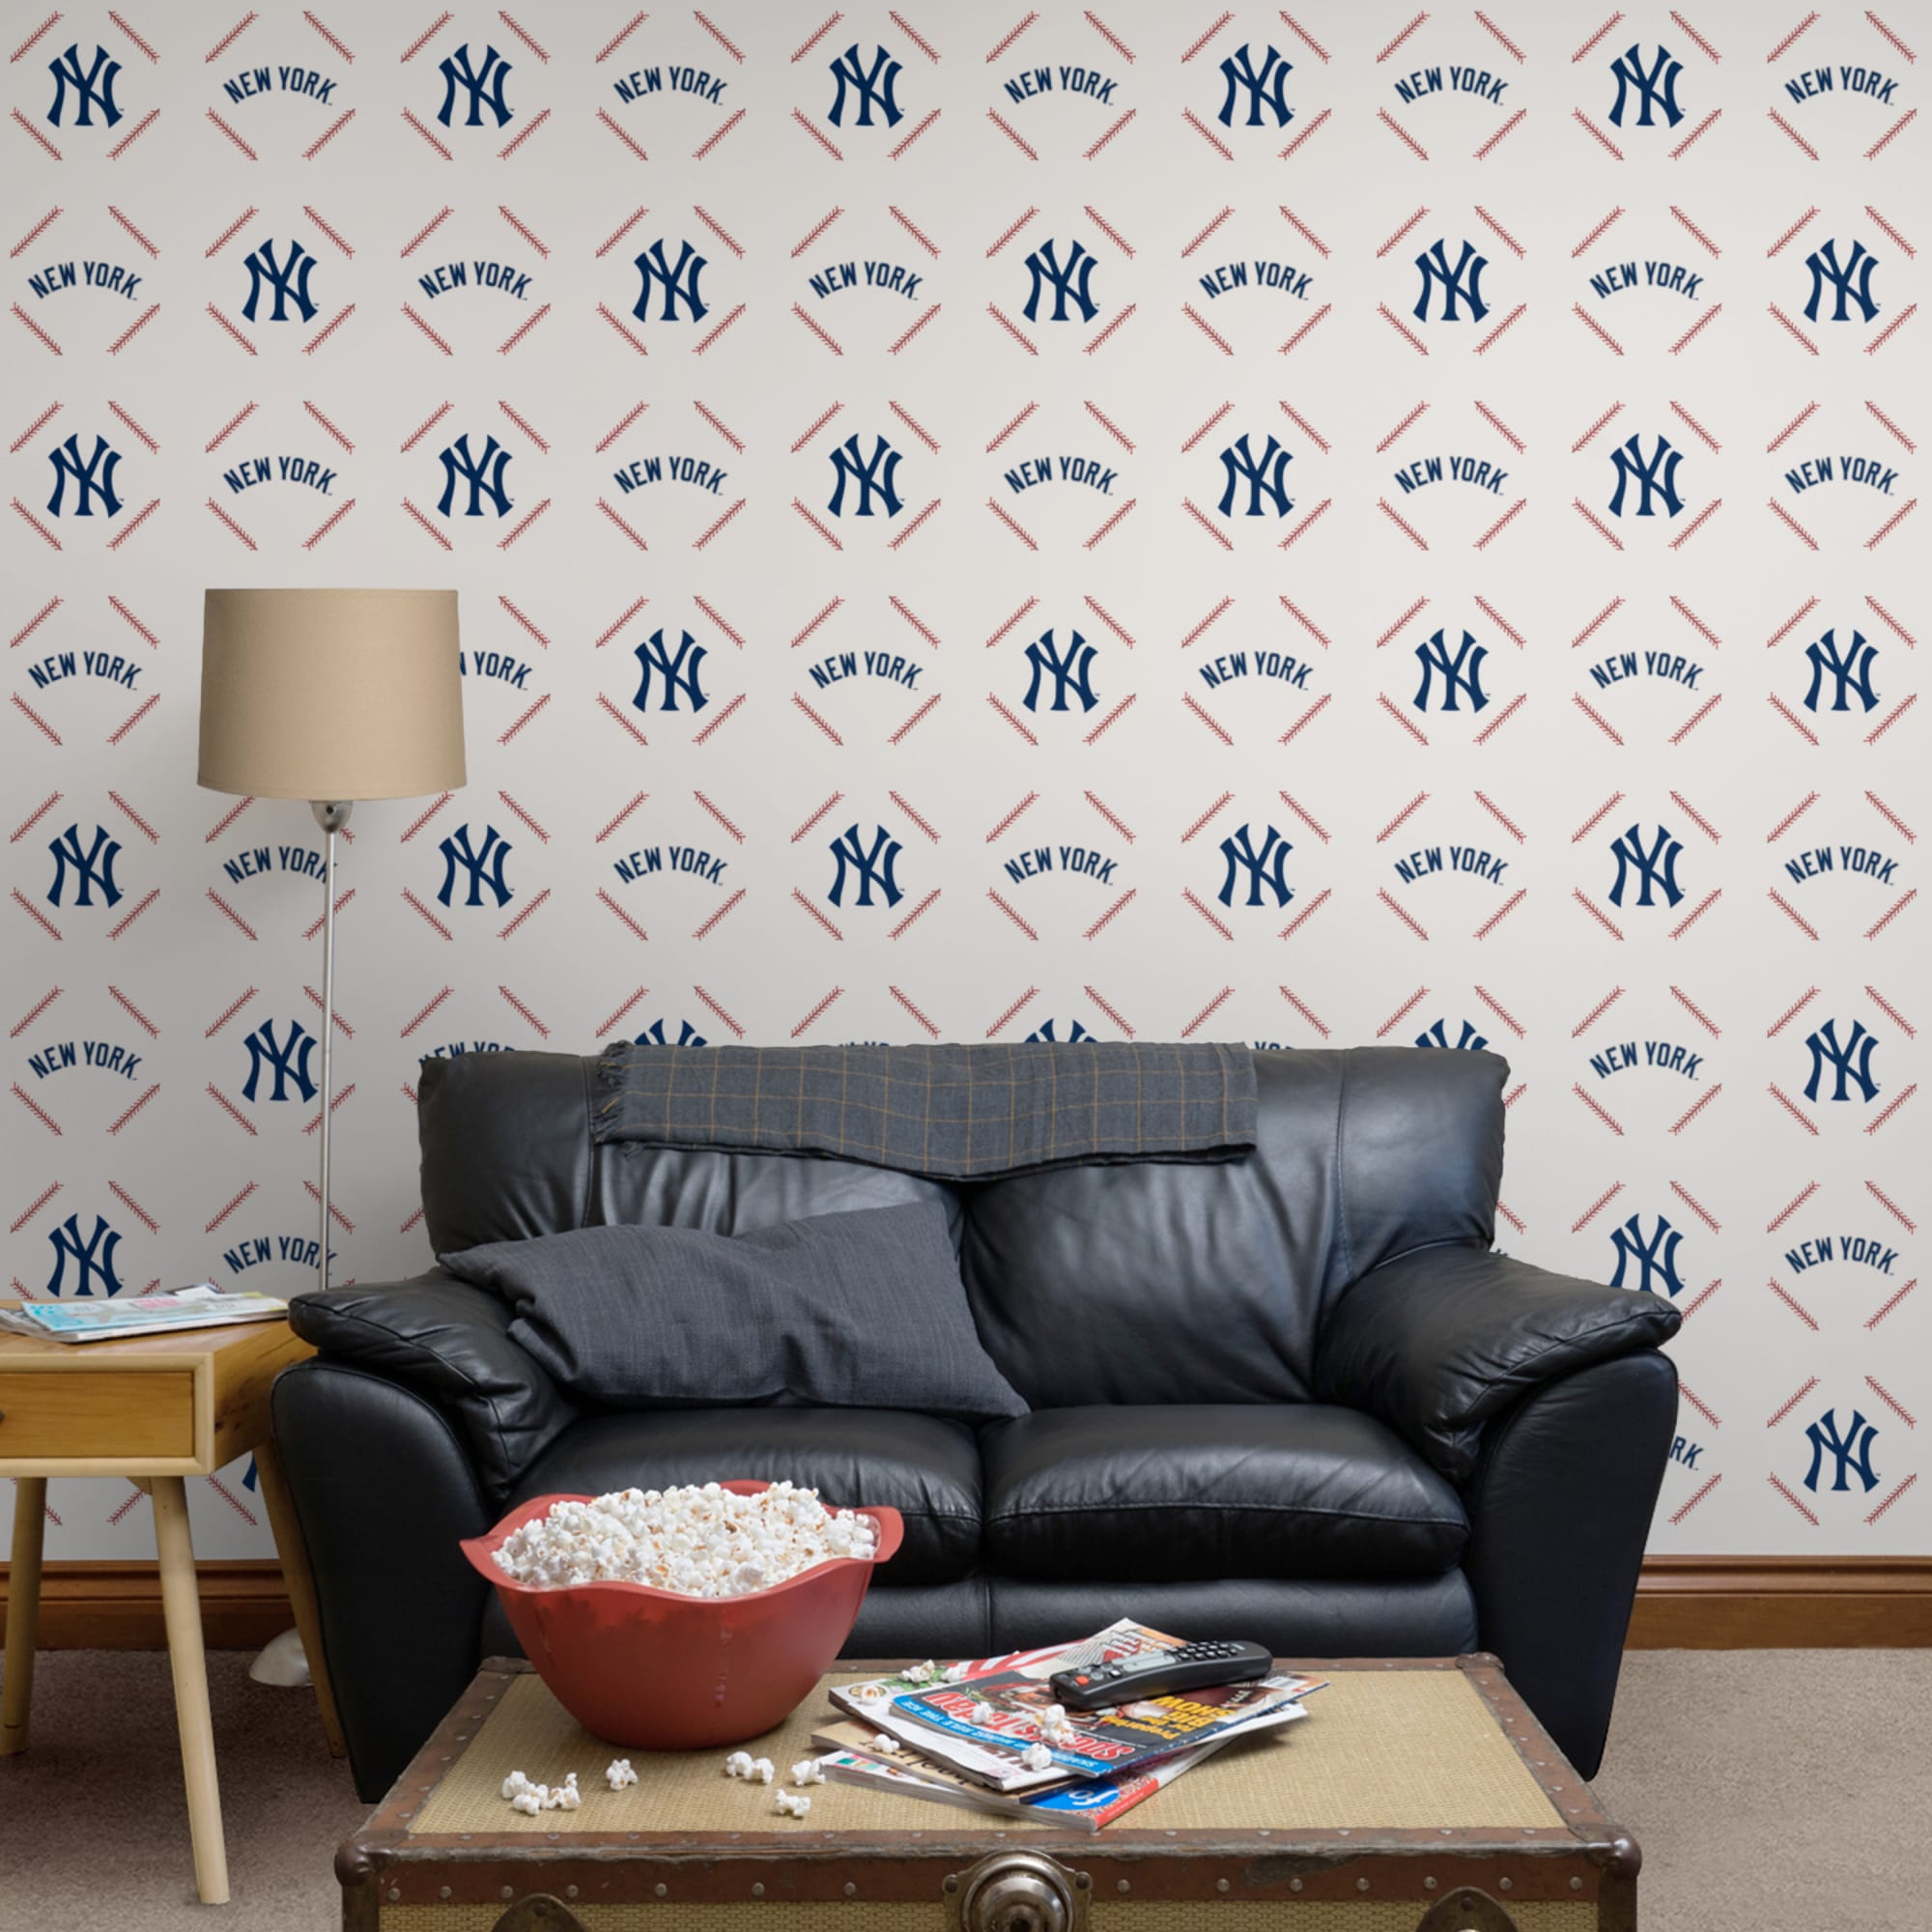 New York Yankees: Stitch Pattern - Officially Licensed Removable Wallpaper 12" x 12" Sample by Fathead | 100% Vinyl